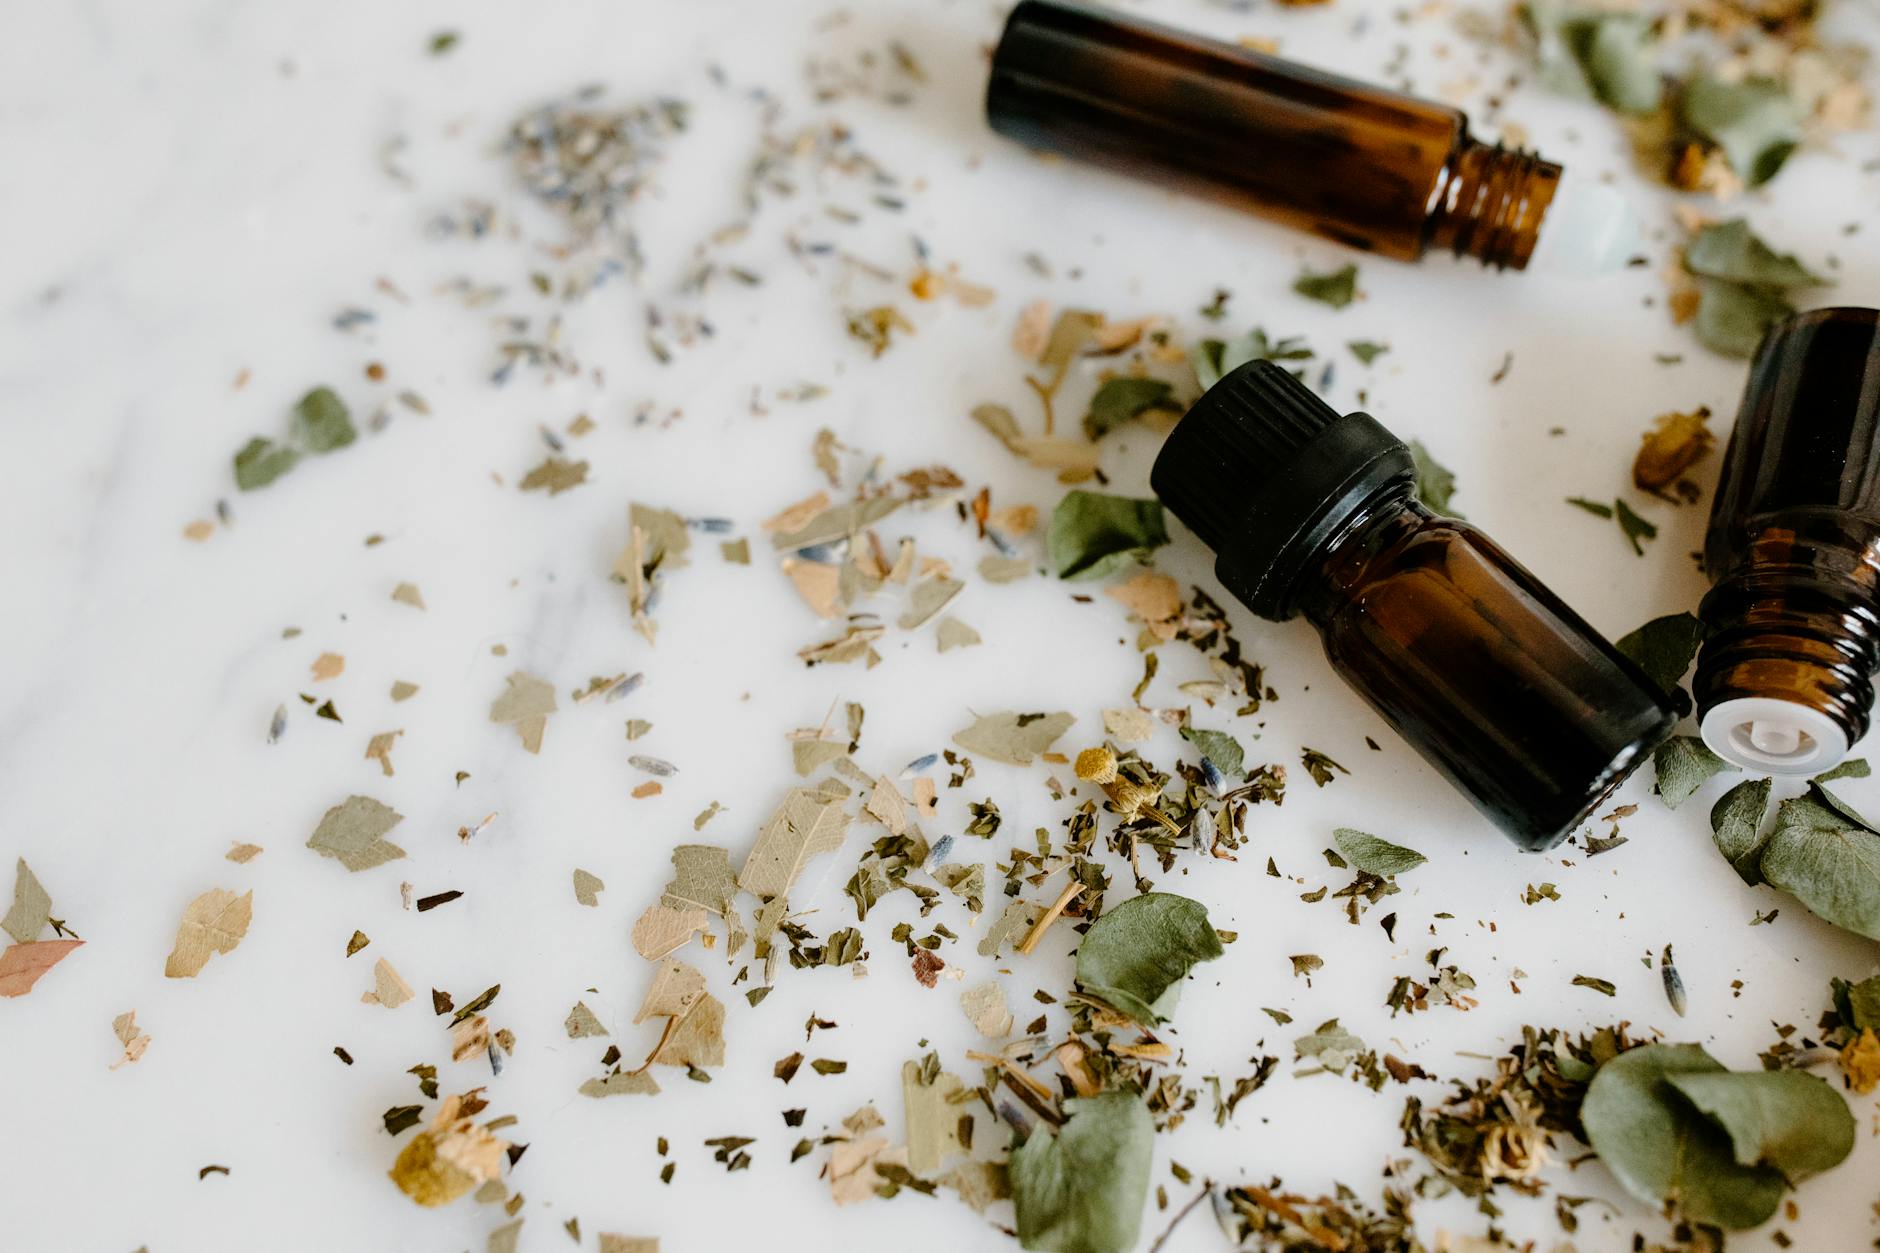 close up shot of essential oil bottles and herbs on white surface